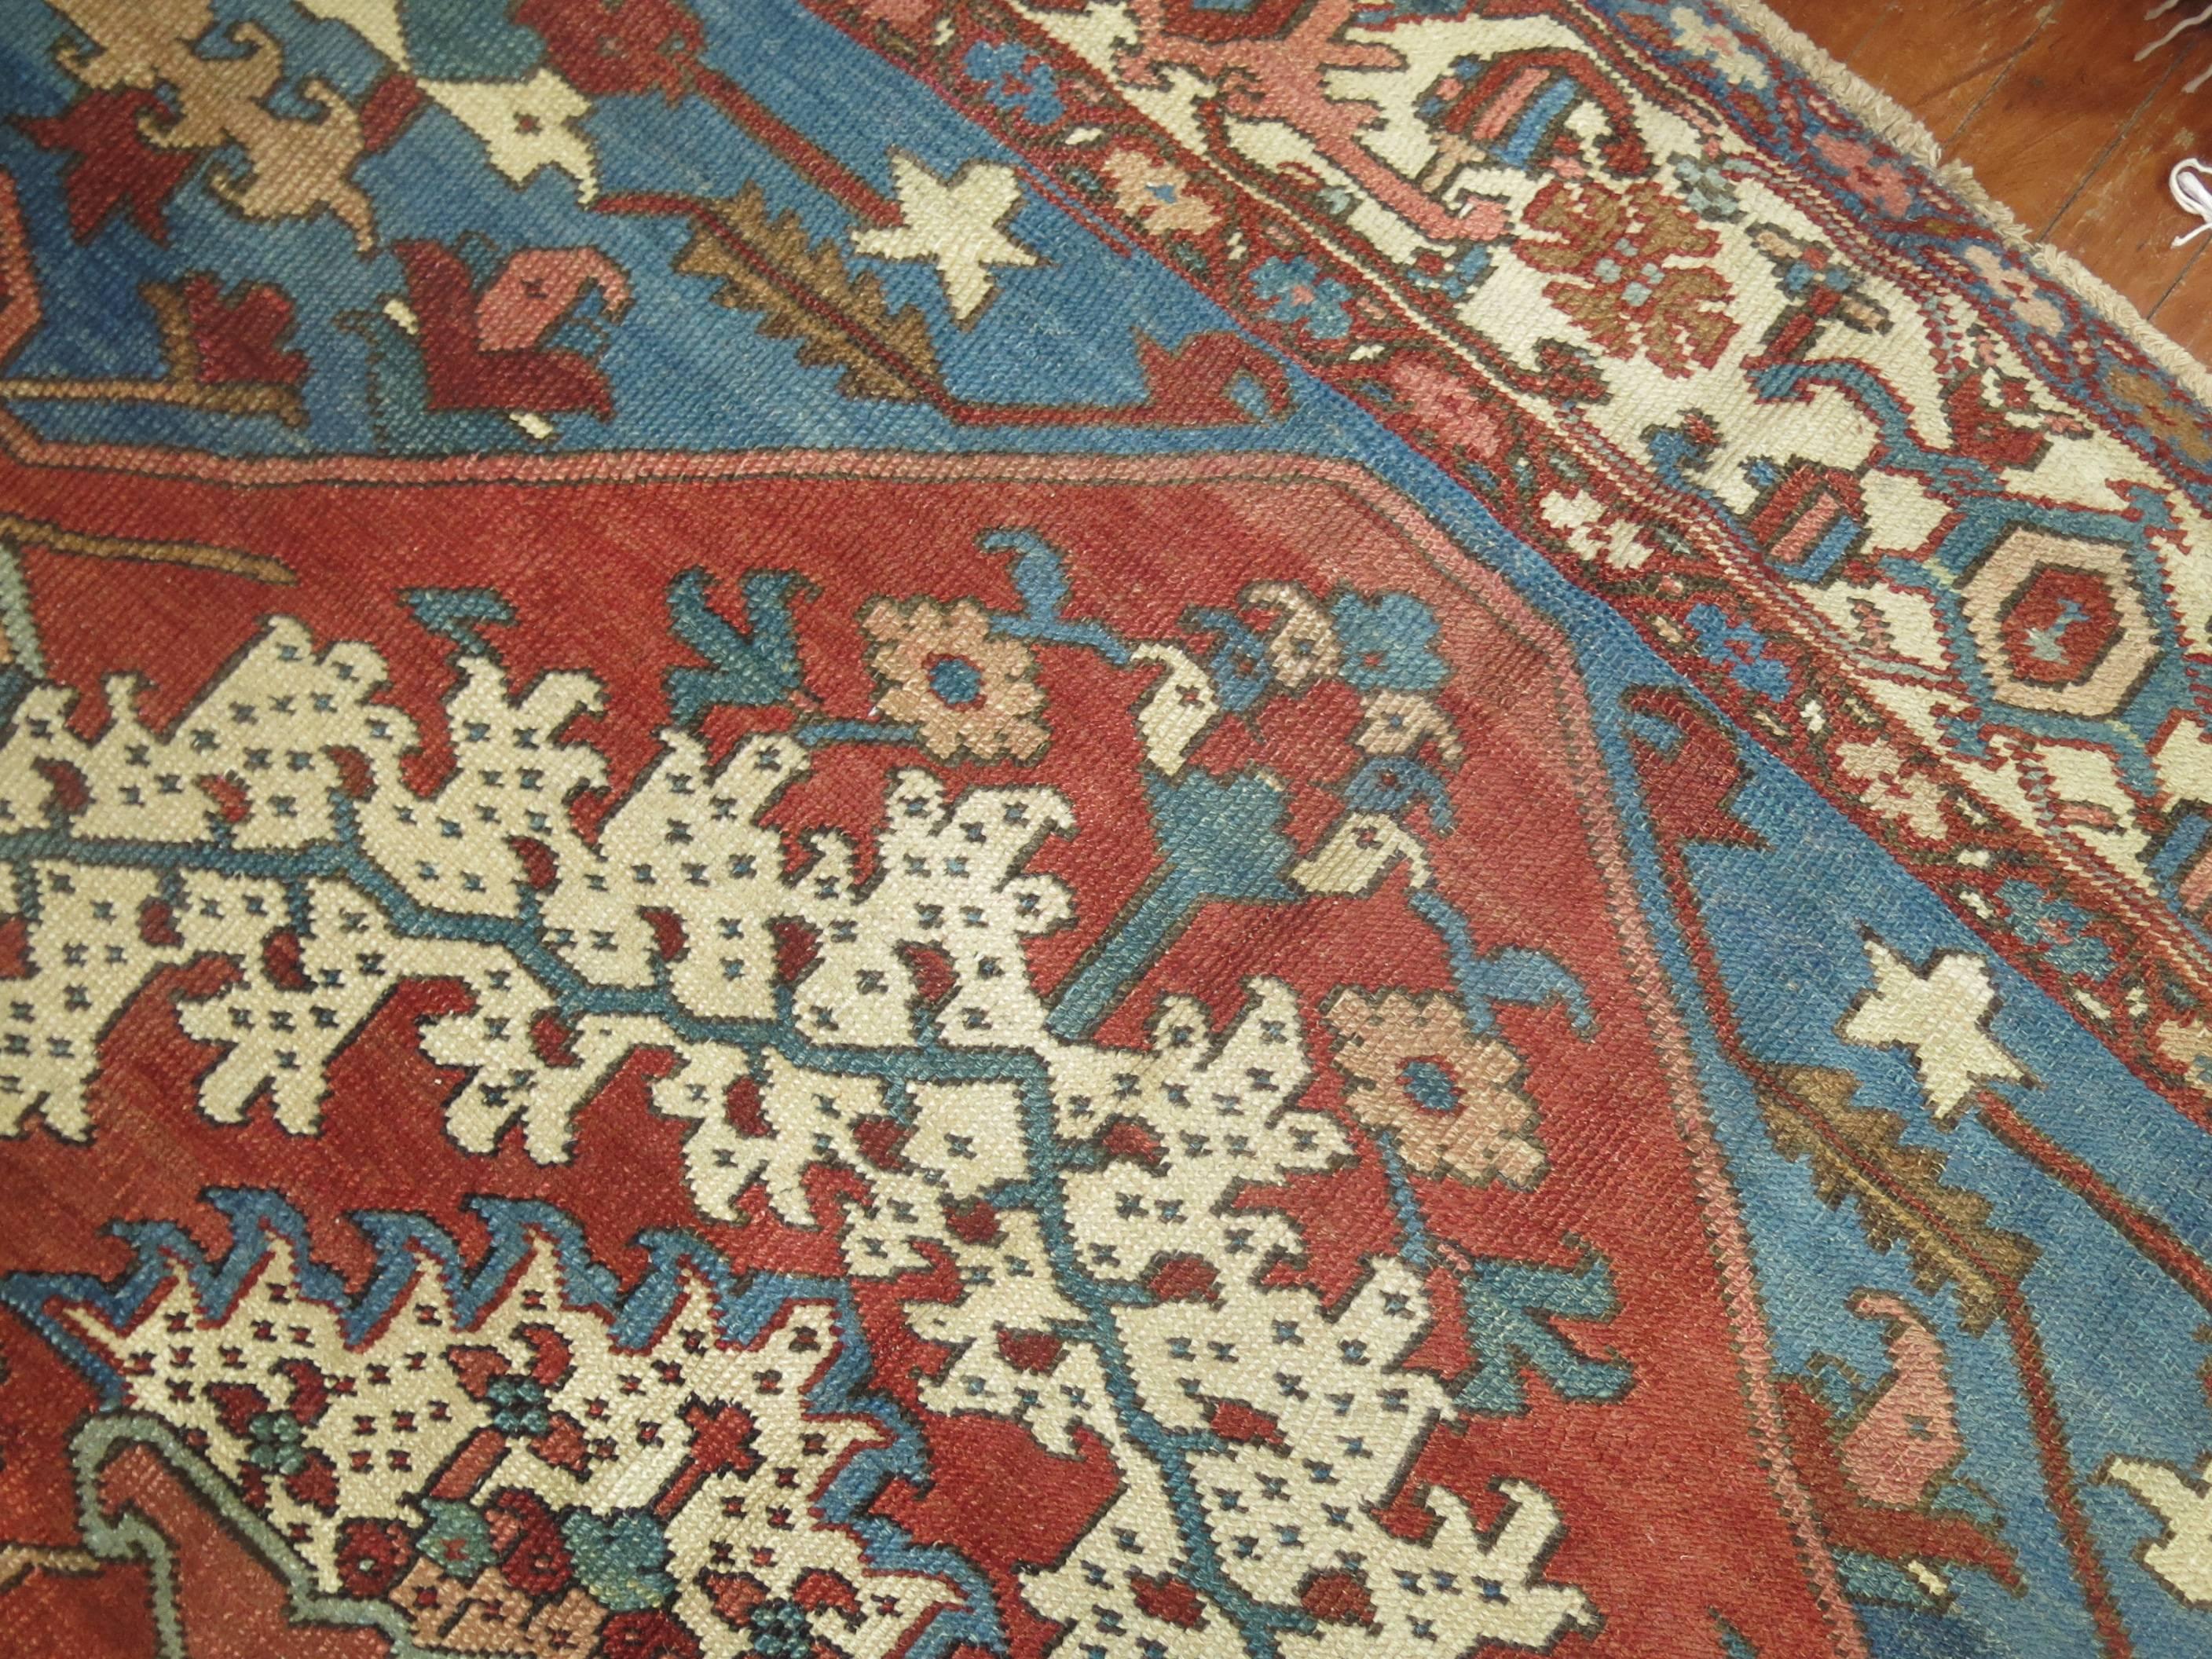 Incredible one of a kind Persian Serapi Bakshaish rug in rusts, blues and creams.

The best Bakshaish carpets offer a unique combination of geometric allover design or graphic or tribal medallion formats with unparalleled use of natural color and